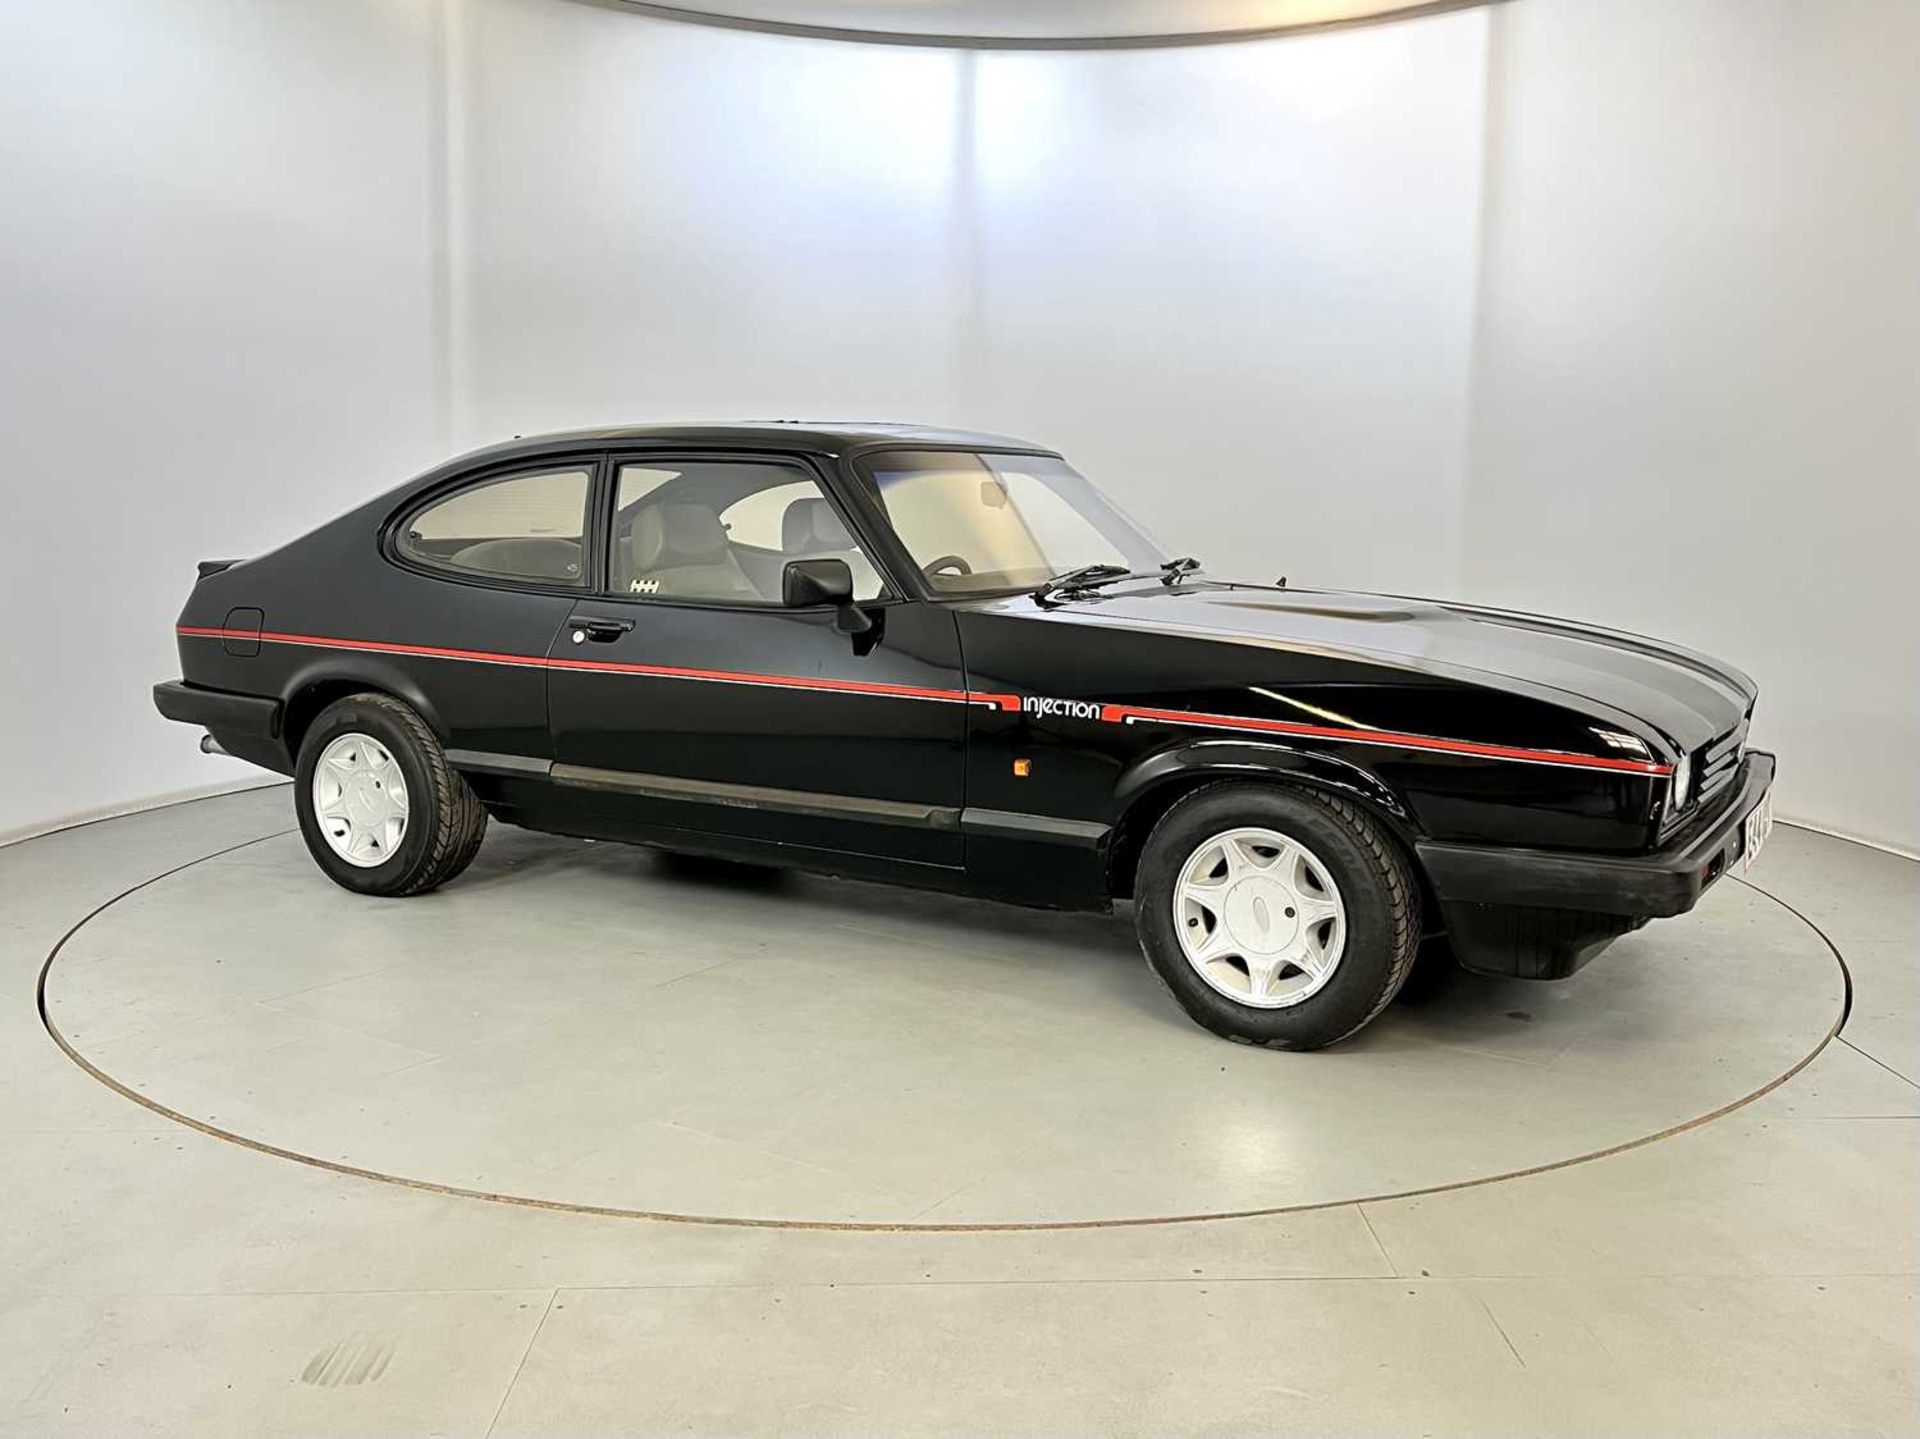 1987 Ford Capri 2.8 Injection - Image 12 of 28